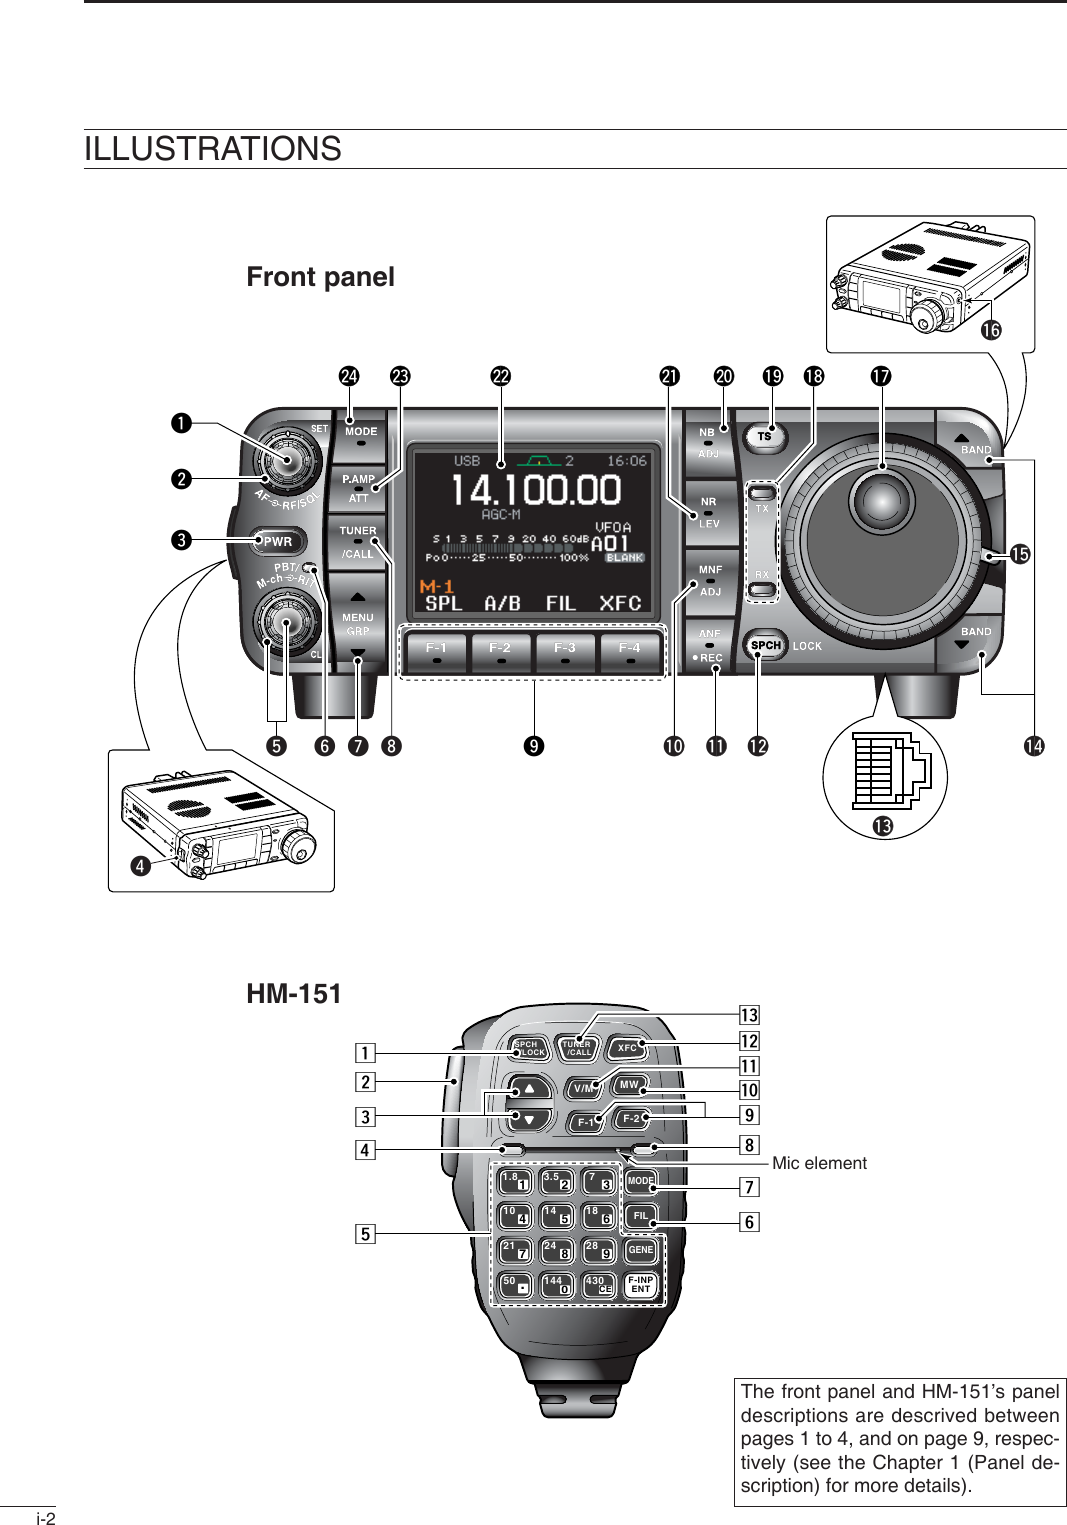 i-2SPCH  /LOCKTUNER  /CALL XFCV/MF-1 F-2FILMODEGENEMW123456789.0CEF-INPENT1.8 3.5 710 14 1821 24 2850 144 430Mic elementqewo!7!8!9@0@2@3@4 @1tryu !2!5!6!1!0i!3!4zcvbnm,.⁄0⁄2⁄3⁄1xFront panelHM-151The front panel and HM-151’s paneldescriptions are descrived betweenpages 1 to 4, and on page 9, respec-tively (see the Chapter 1 (Panel de-scription) for more details).ILLUSTRATIONS